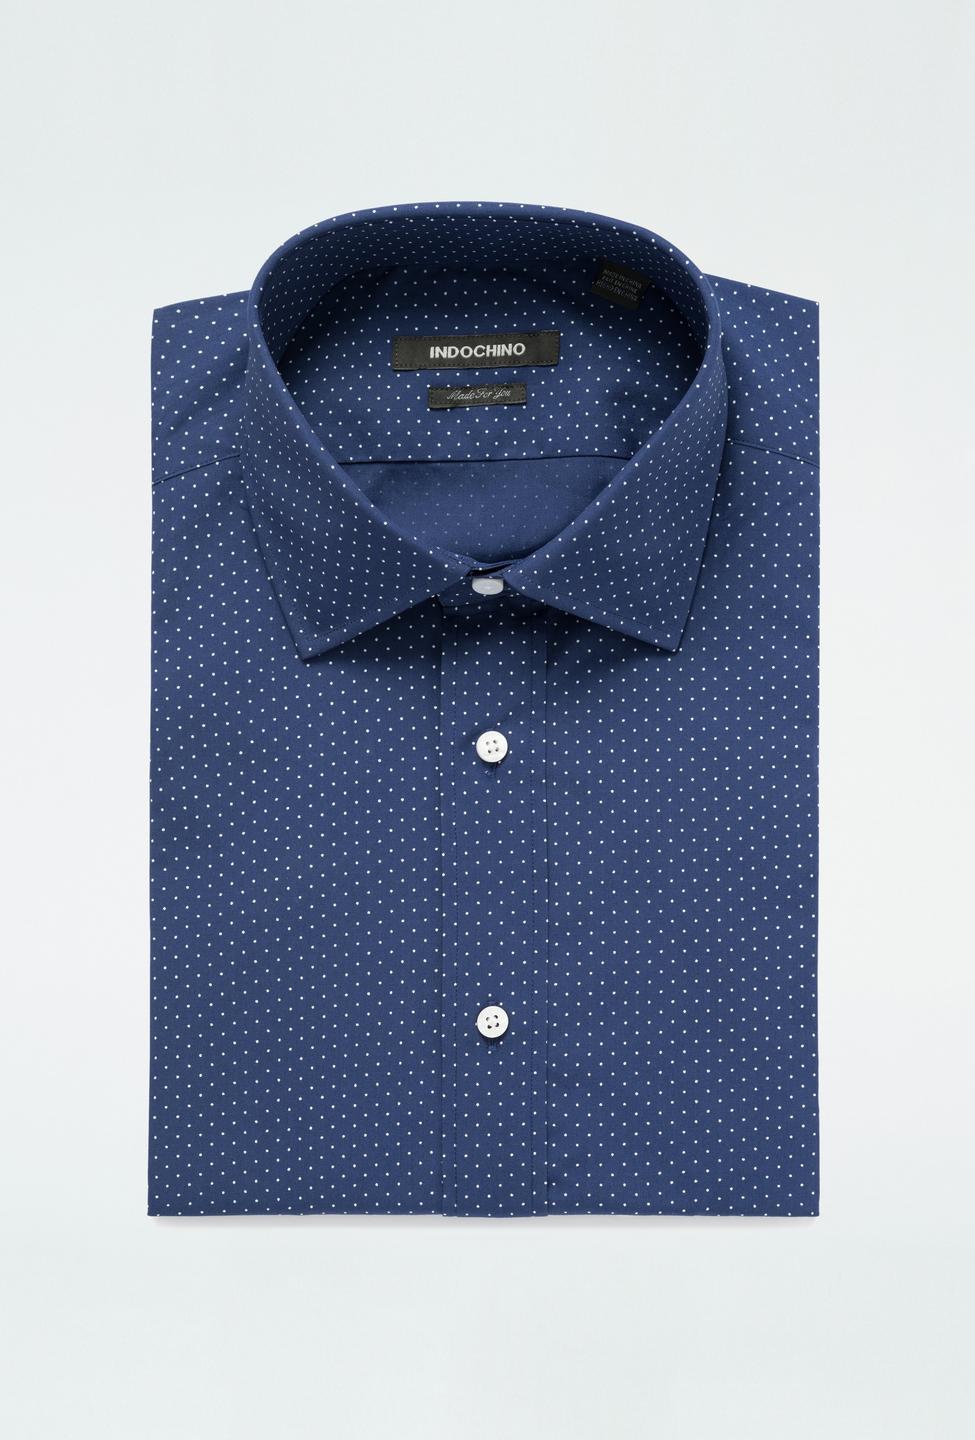 Blue shirt - Pattern Design from Seasonal Indochino Collection